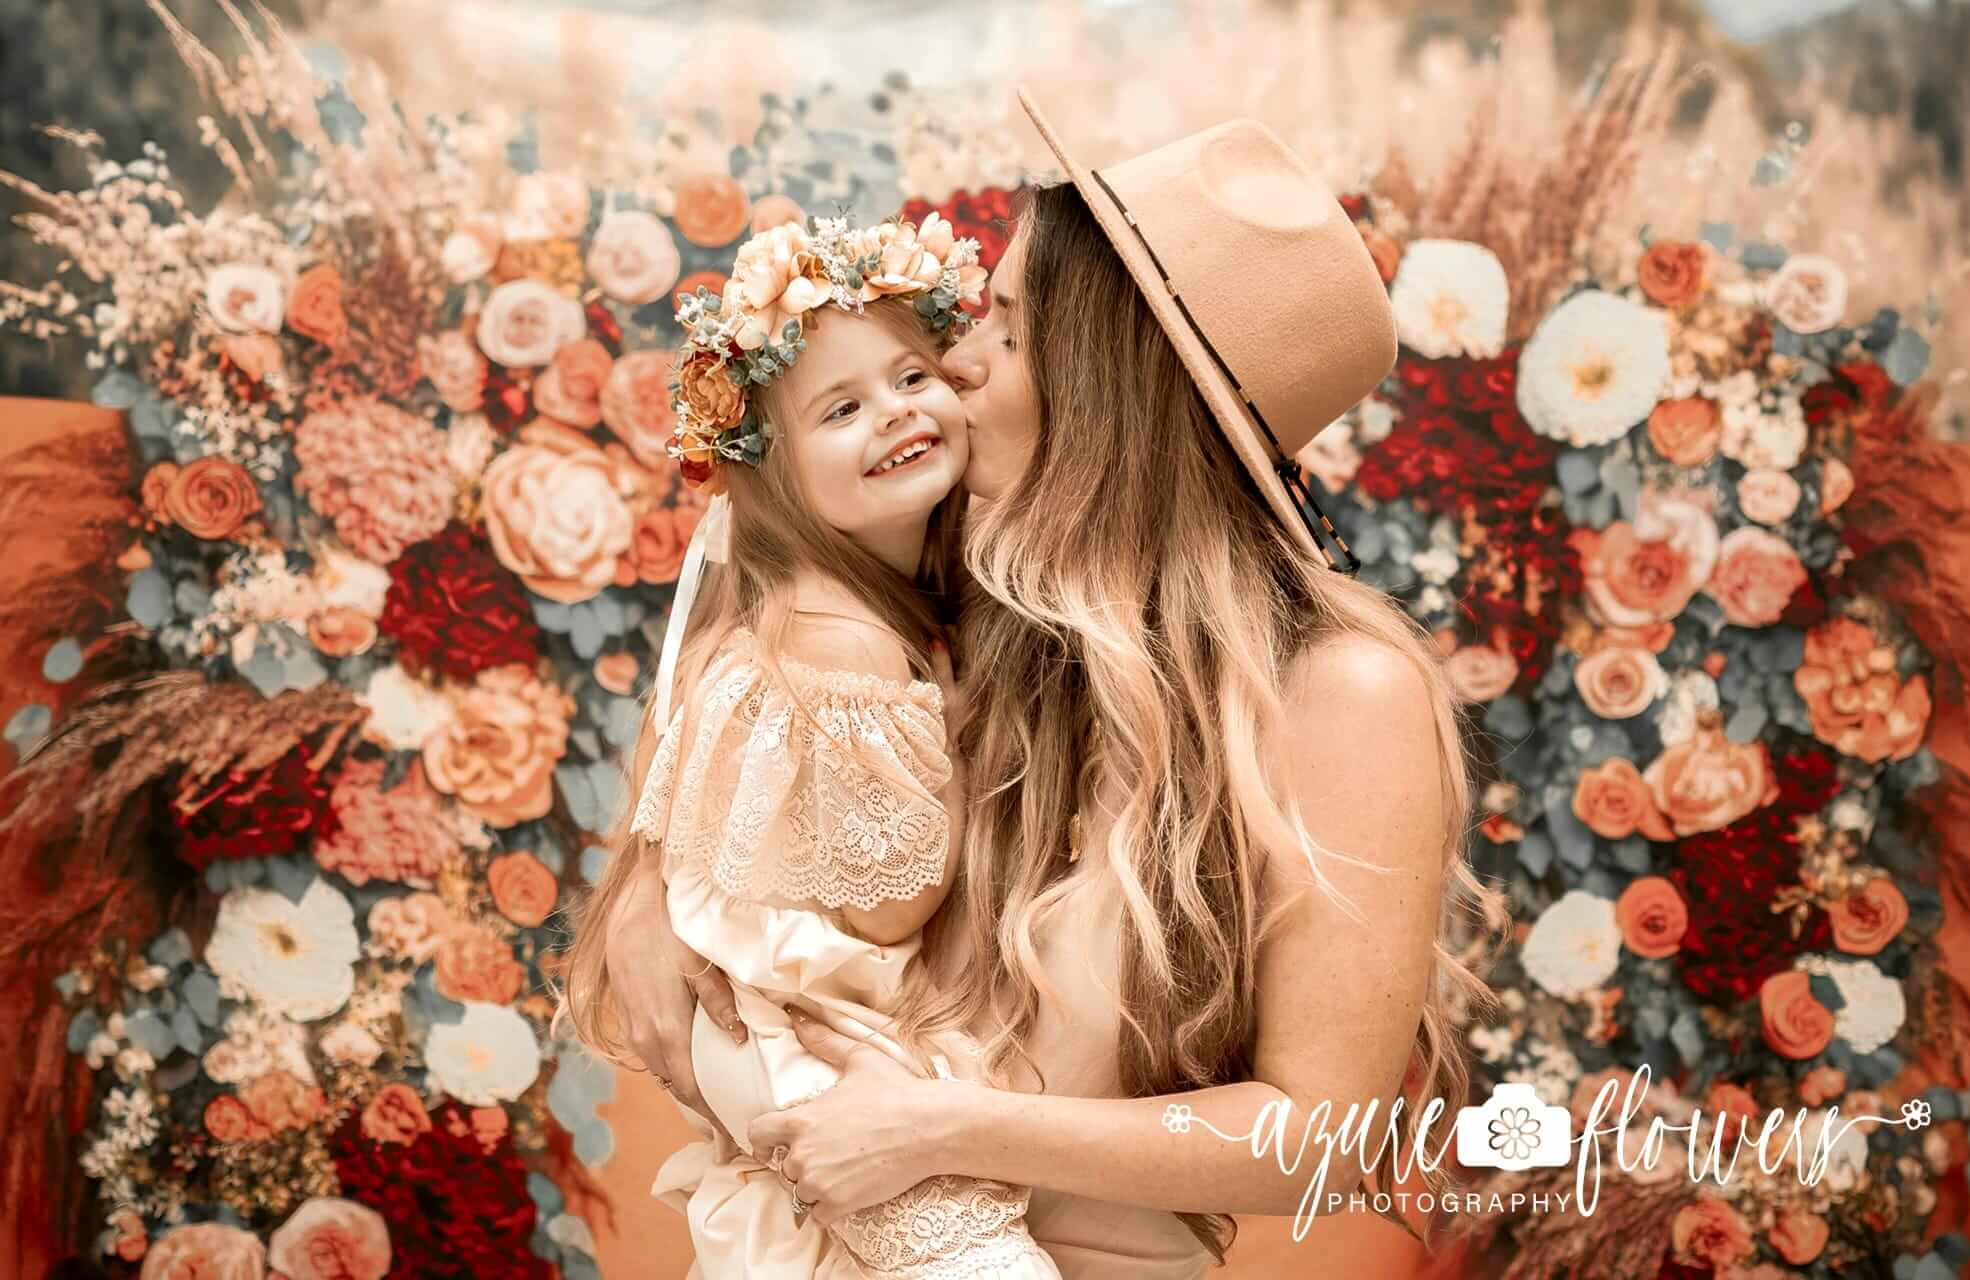 Kate Painted Boho Free Spirit Outside Floral Backdrop Designed by Mini MakeBelieve